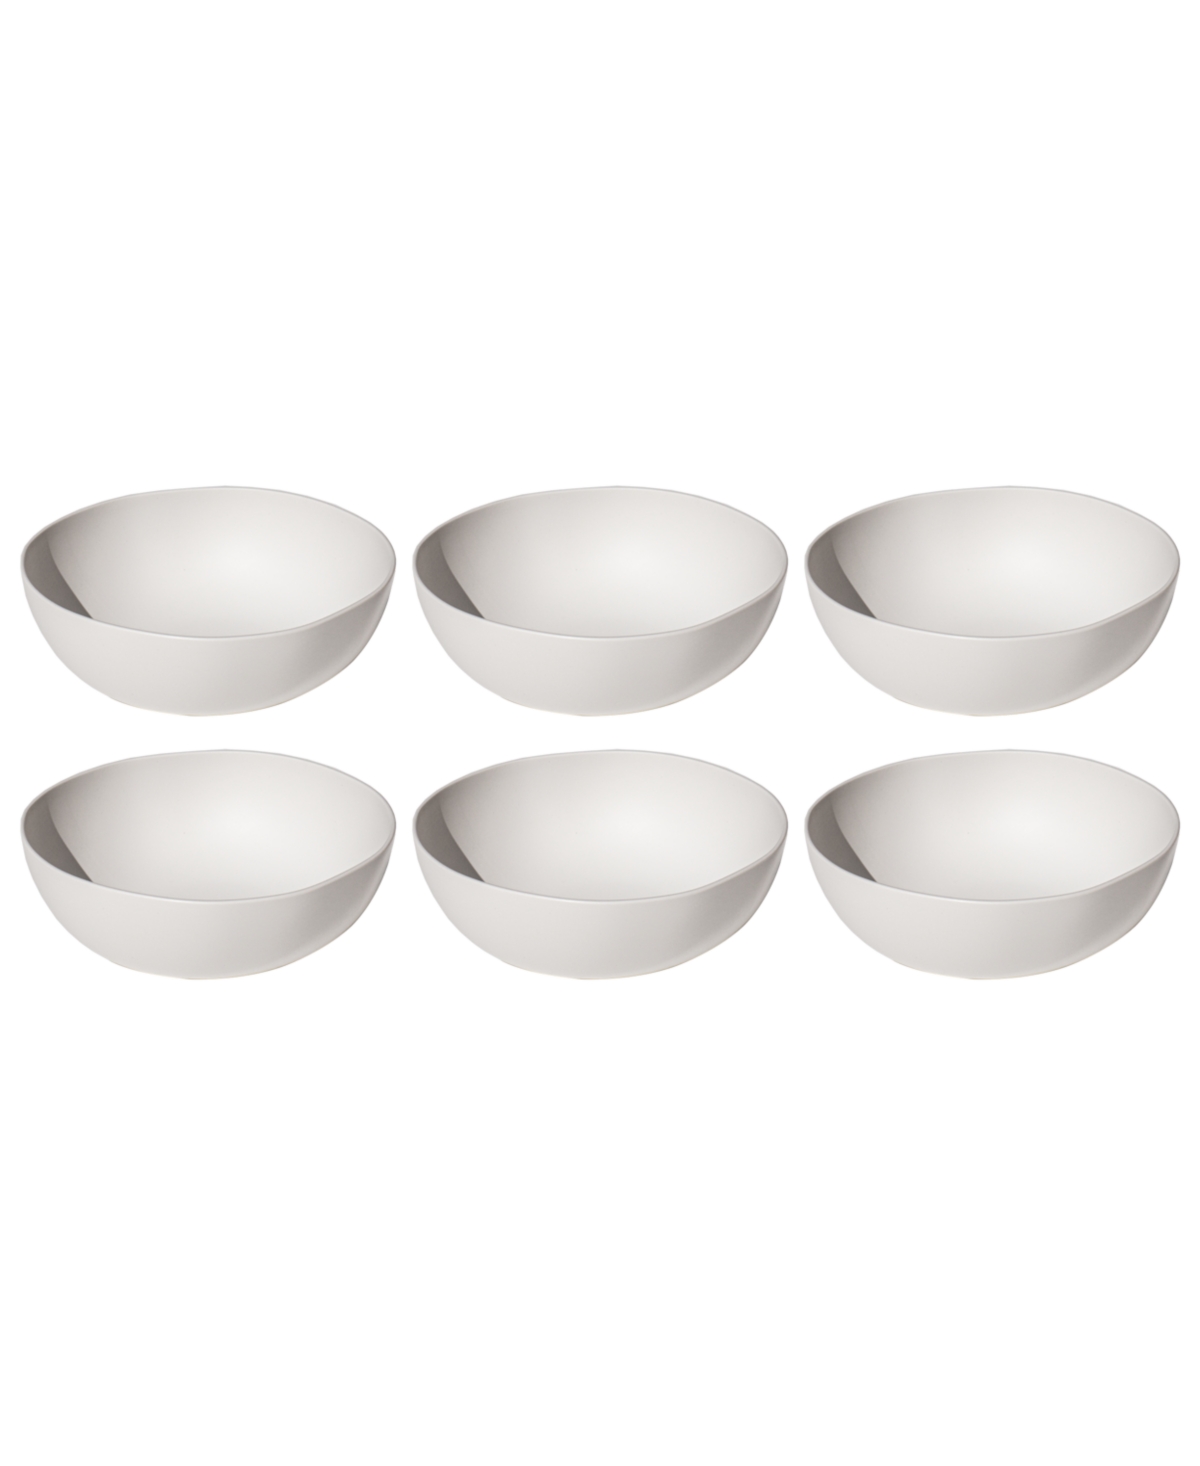 Natureone Craft 7.1" Coupe Bowls Soft Matte Finish 37 oz, Set of 6, Service for 6 - White